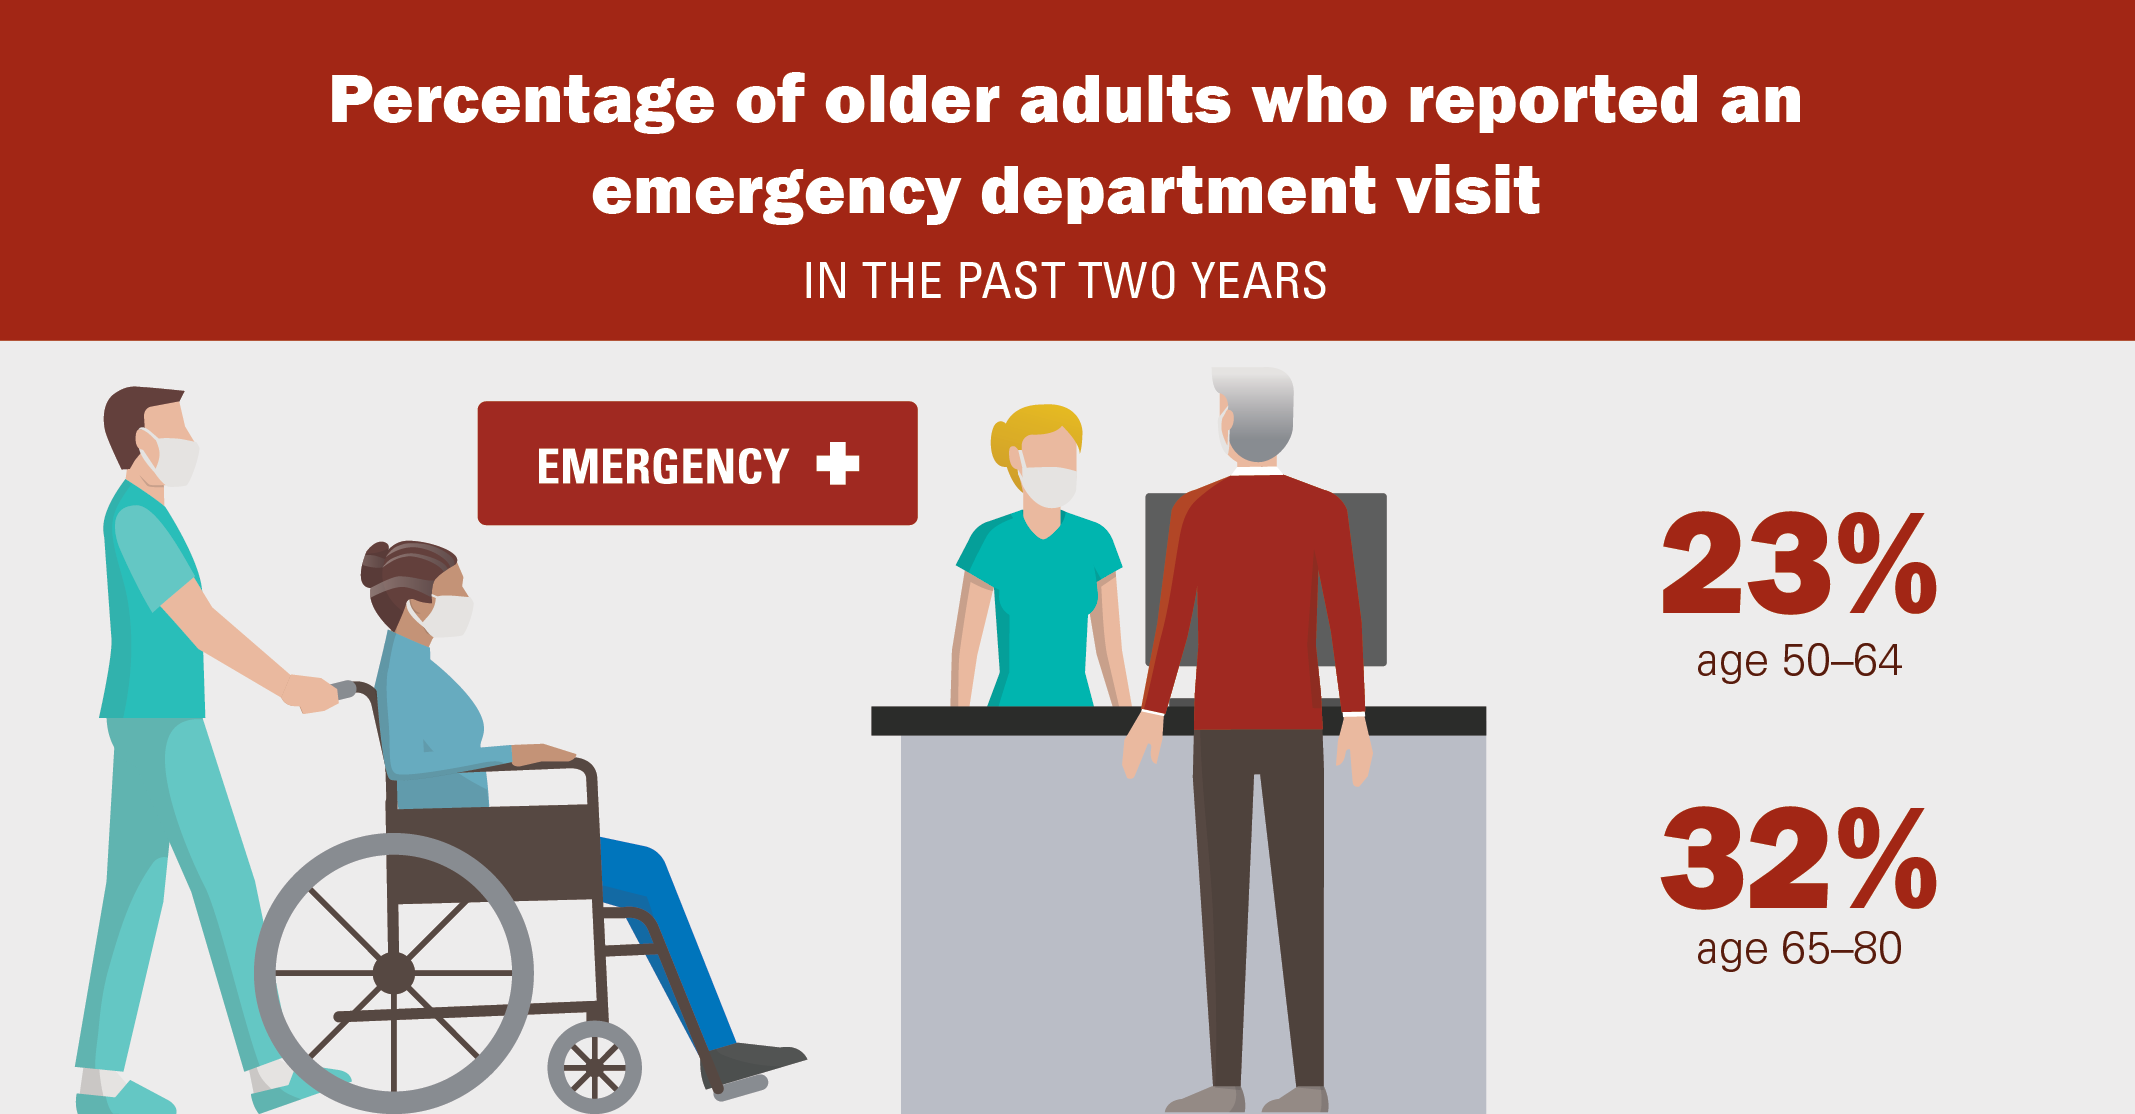 Percentage of older adults who reported an emergency dept. visit in the past two years: 23% age 50-64, 32% age 65-80